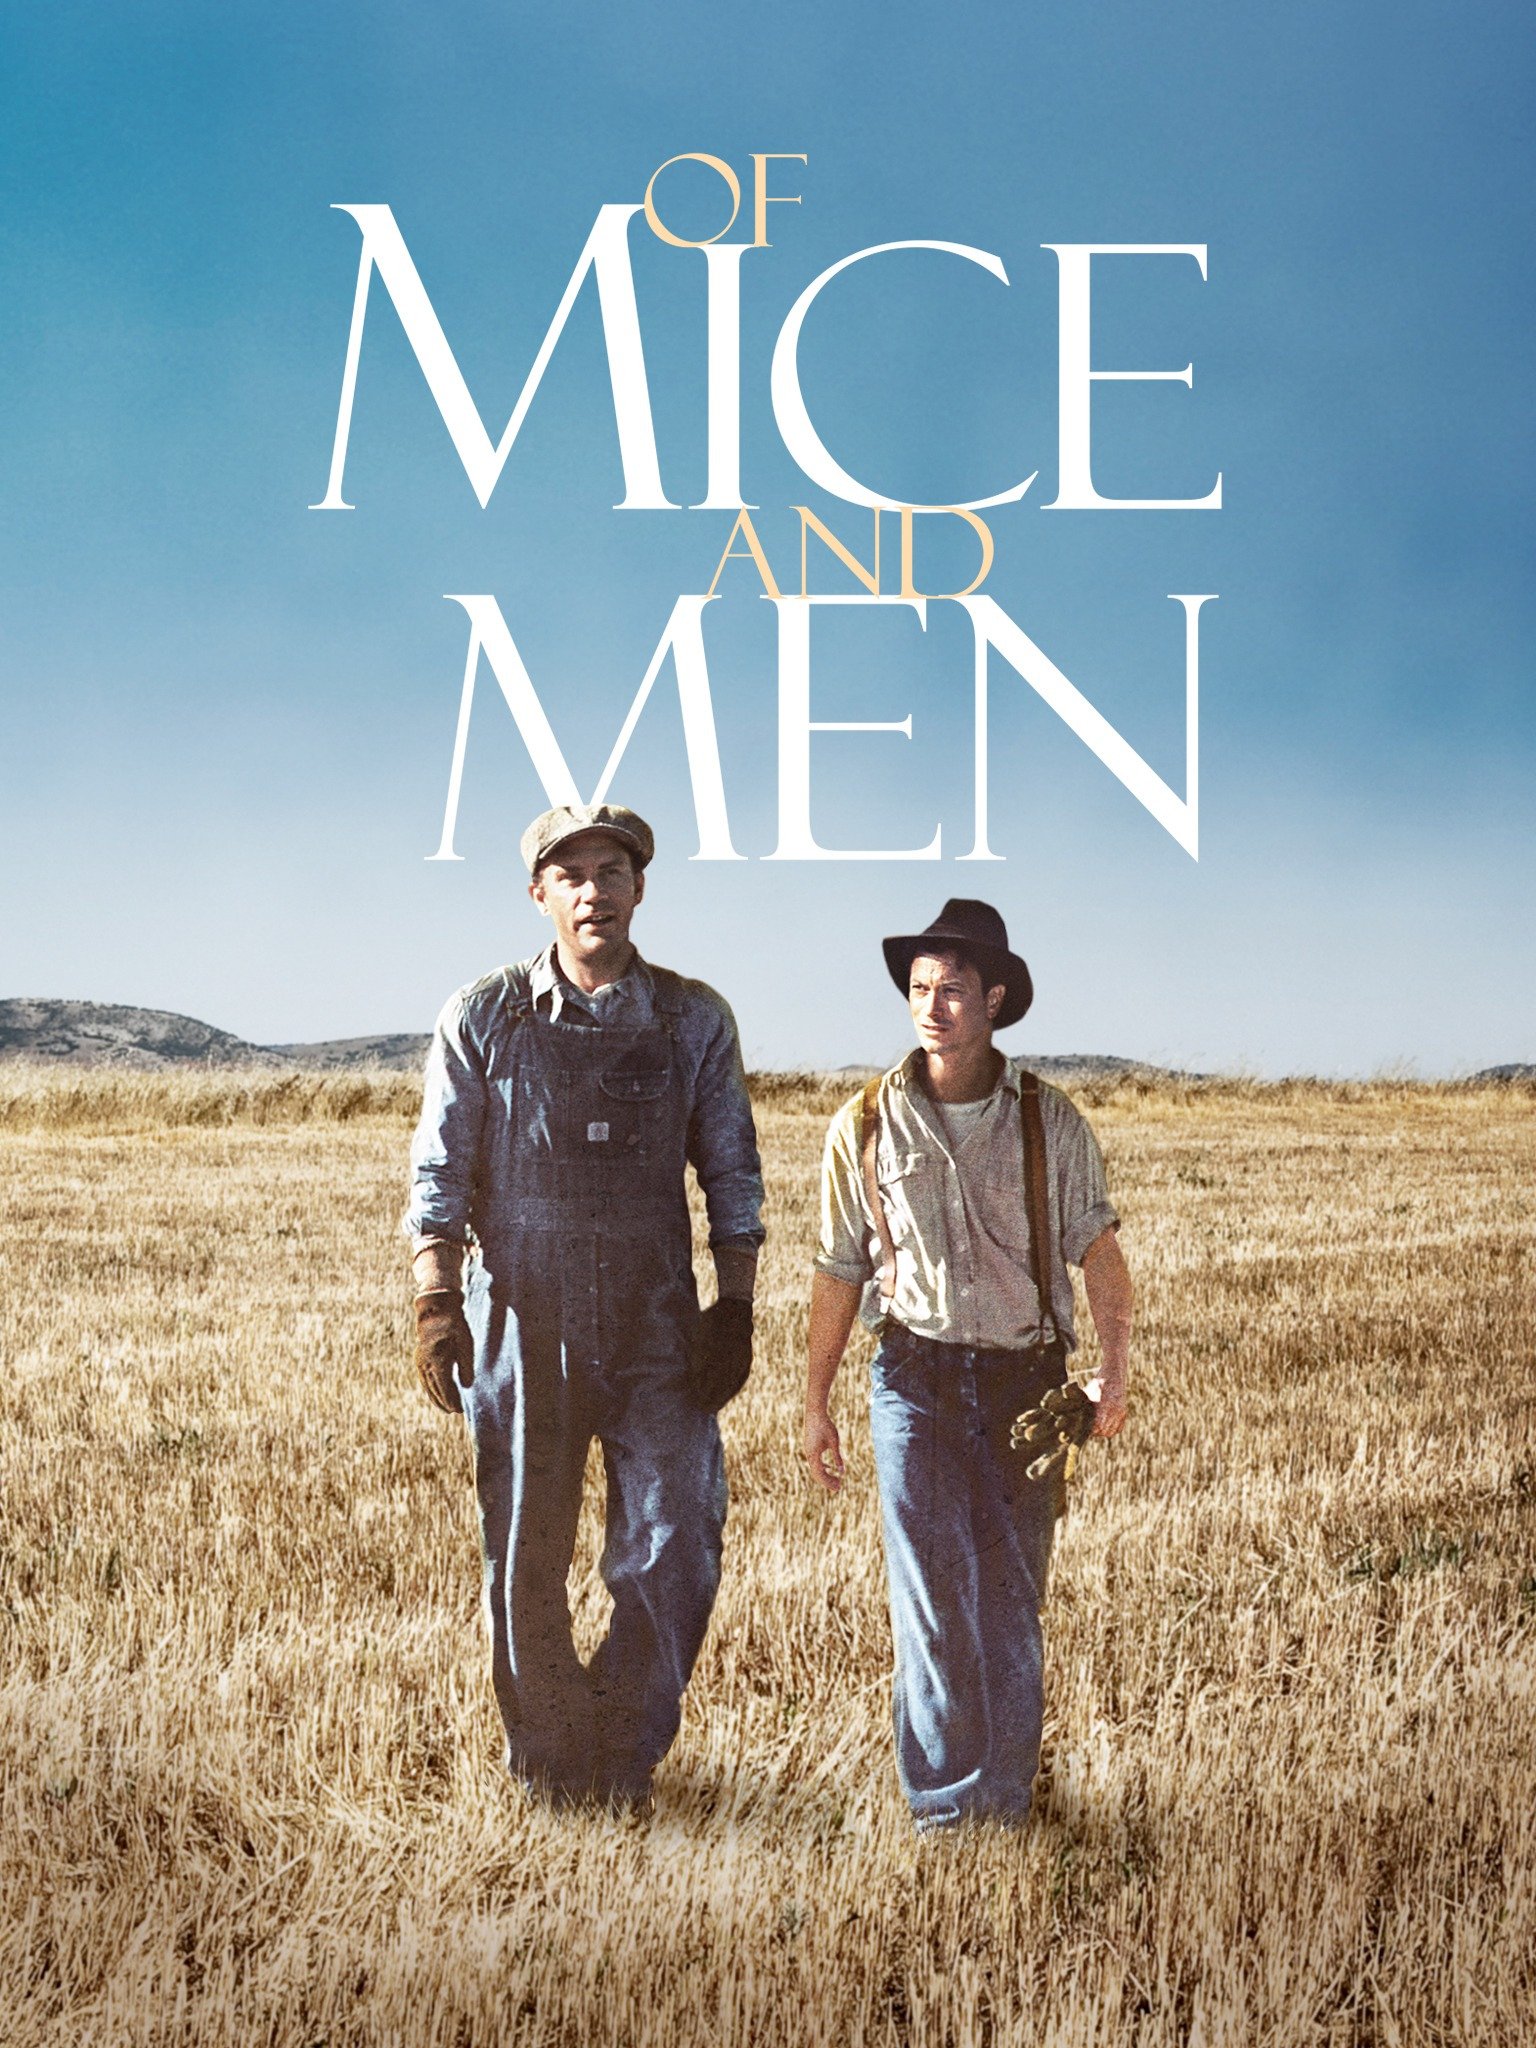 curley of mice and men mad